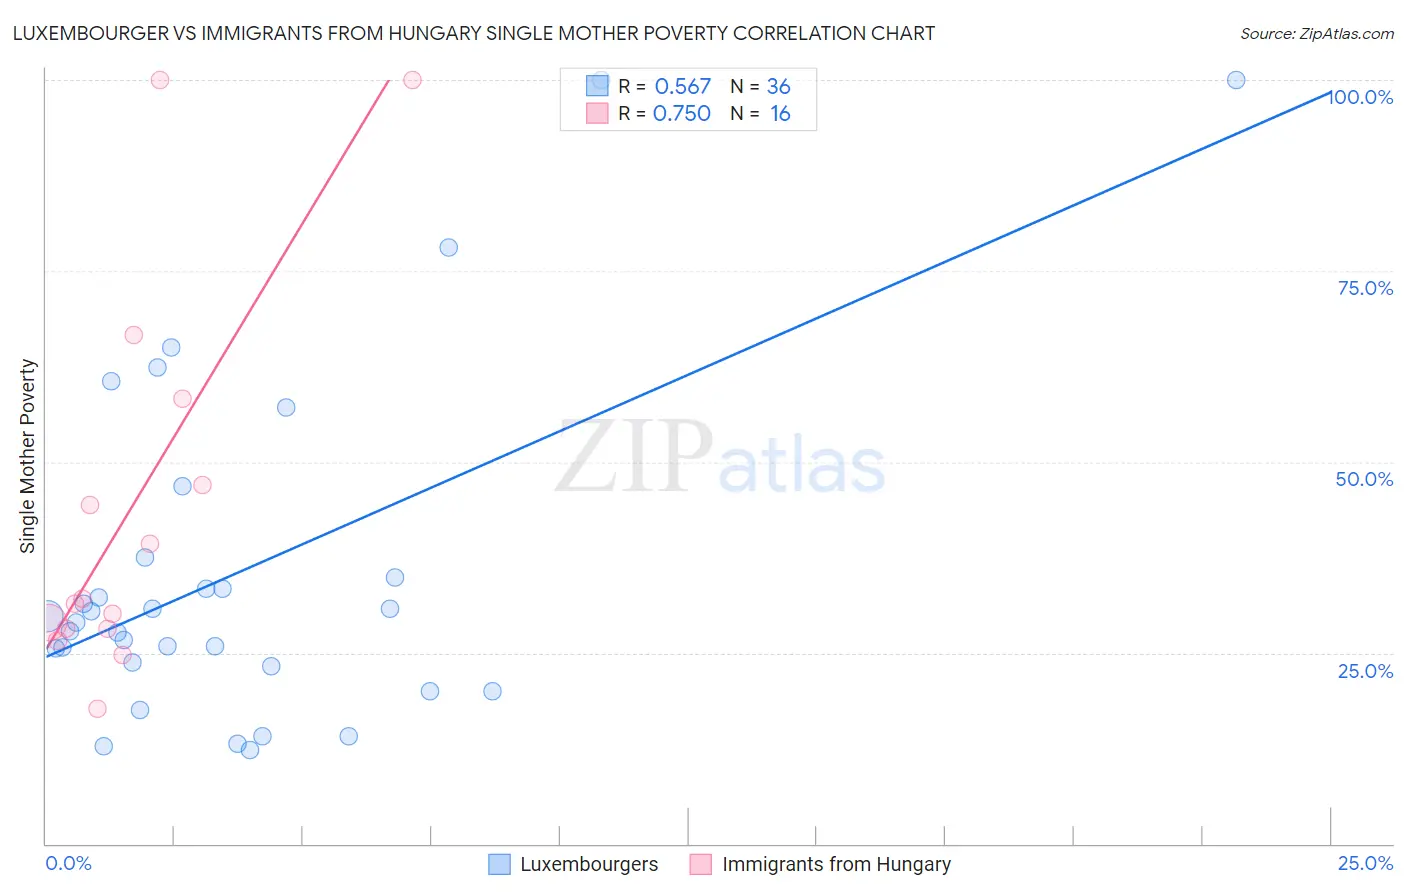 Luxembourger vs Immigrants from Hungary Single Mother Poverty